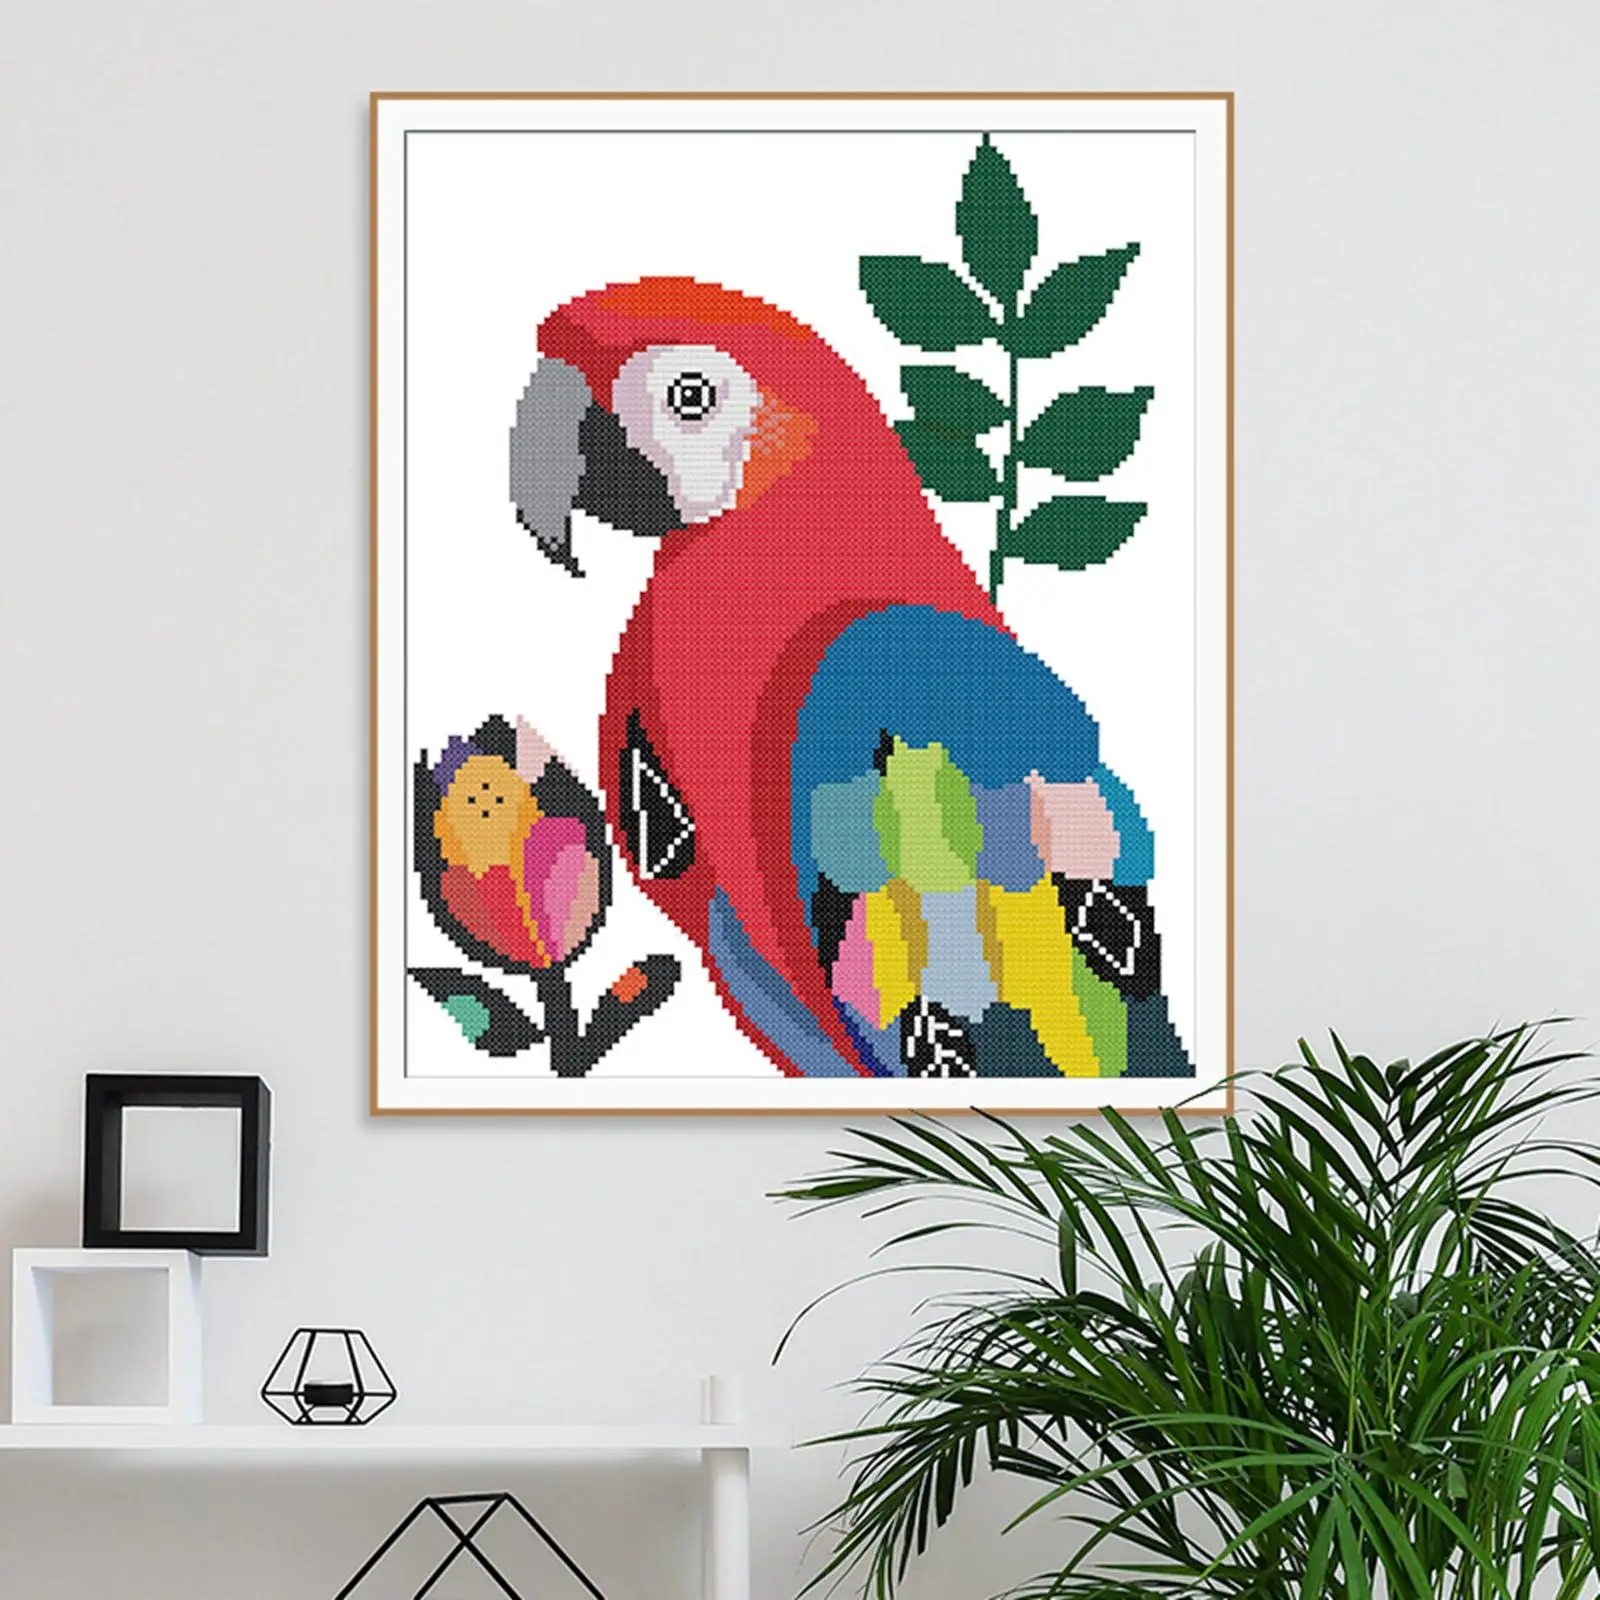 Parrot Cross Stitch Kit with Basic Tools DIY Full Embroidery Starter Kits Needlework Arts Crafts for Beginners Home Wall Decor